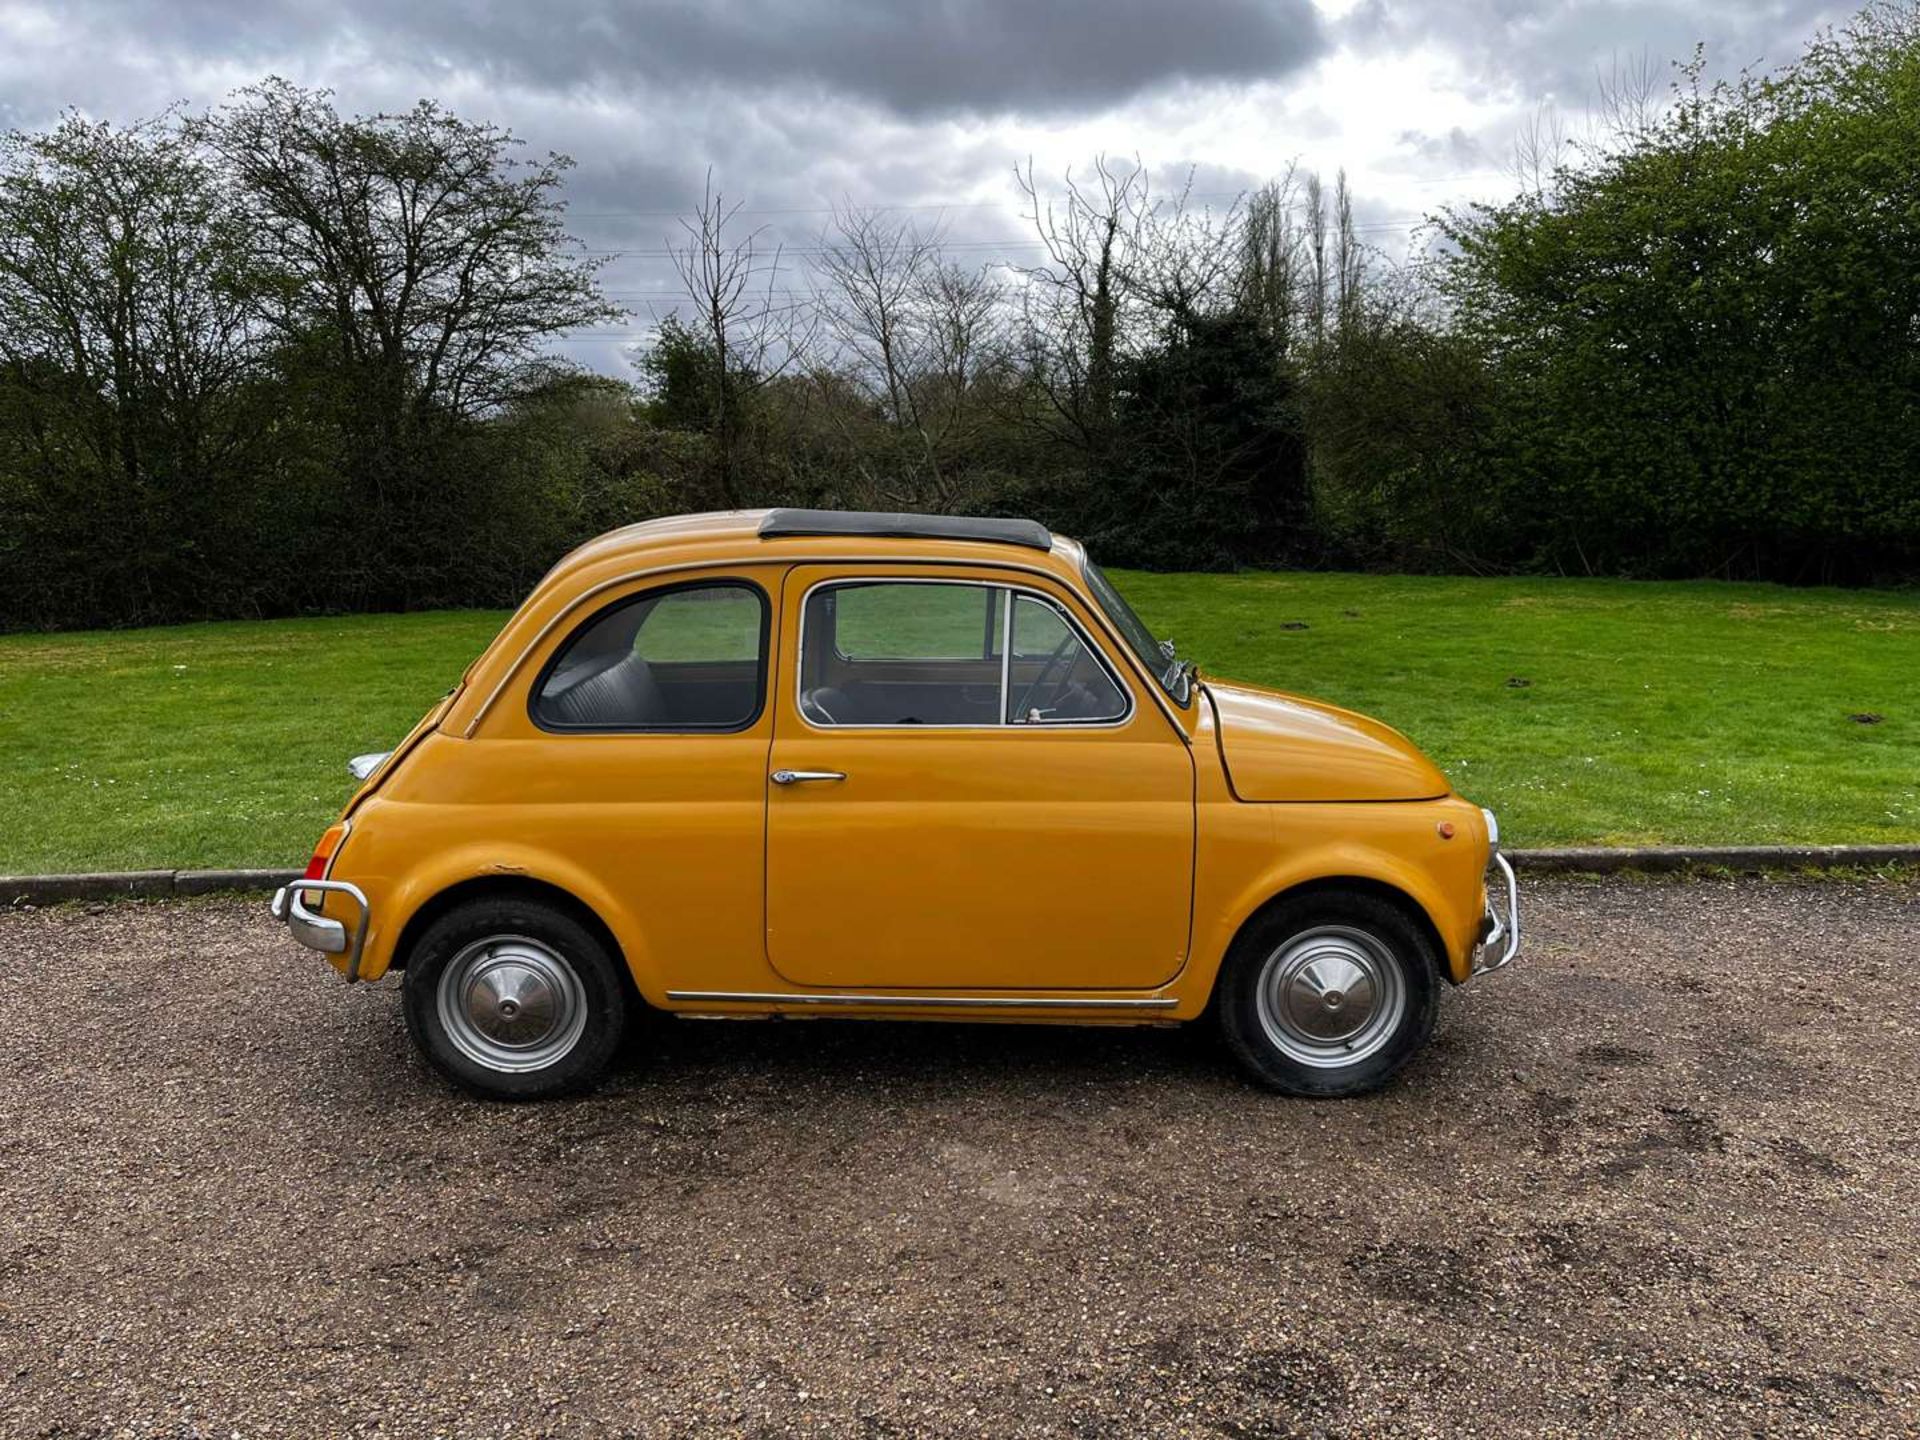 1970 FIAT 500 LHD - Image 8 of 29